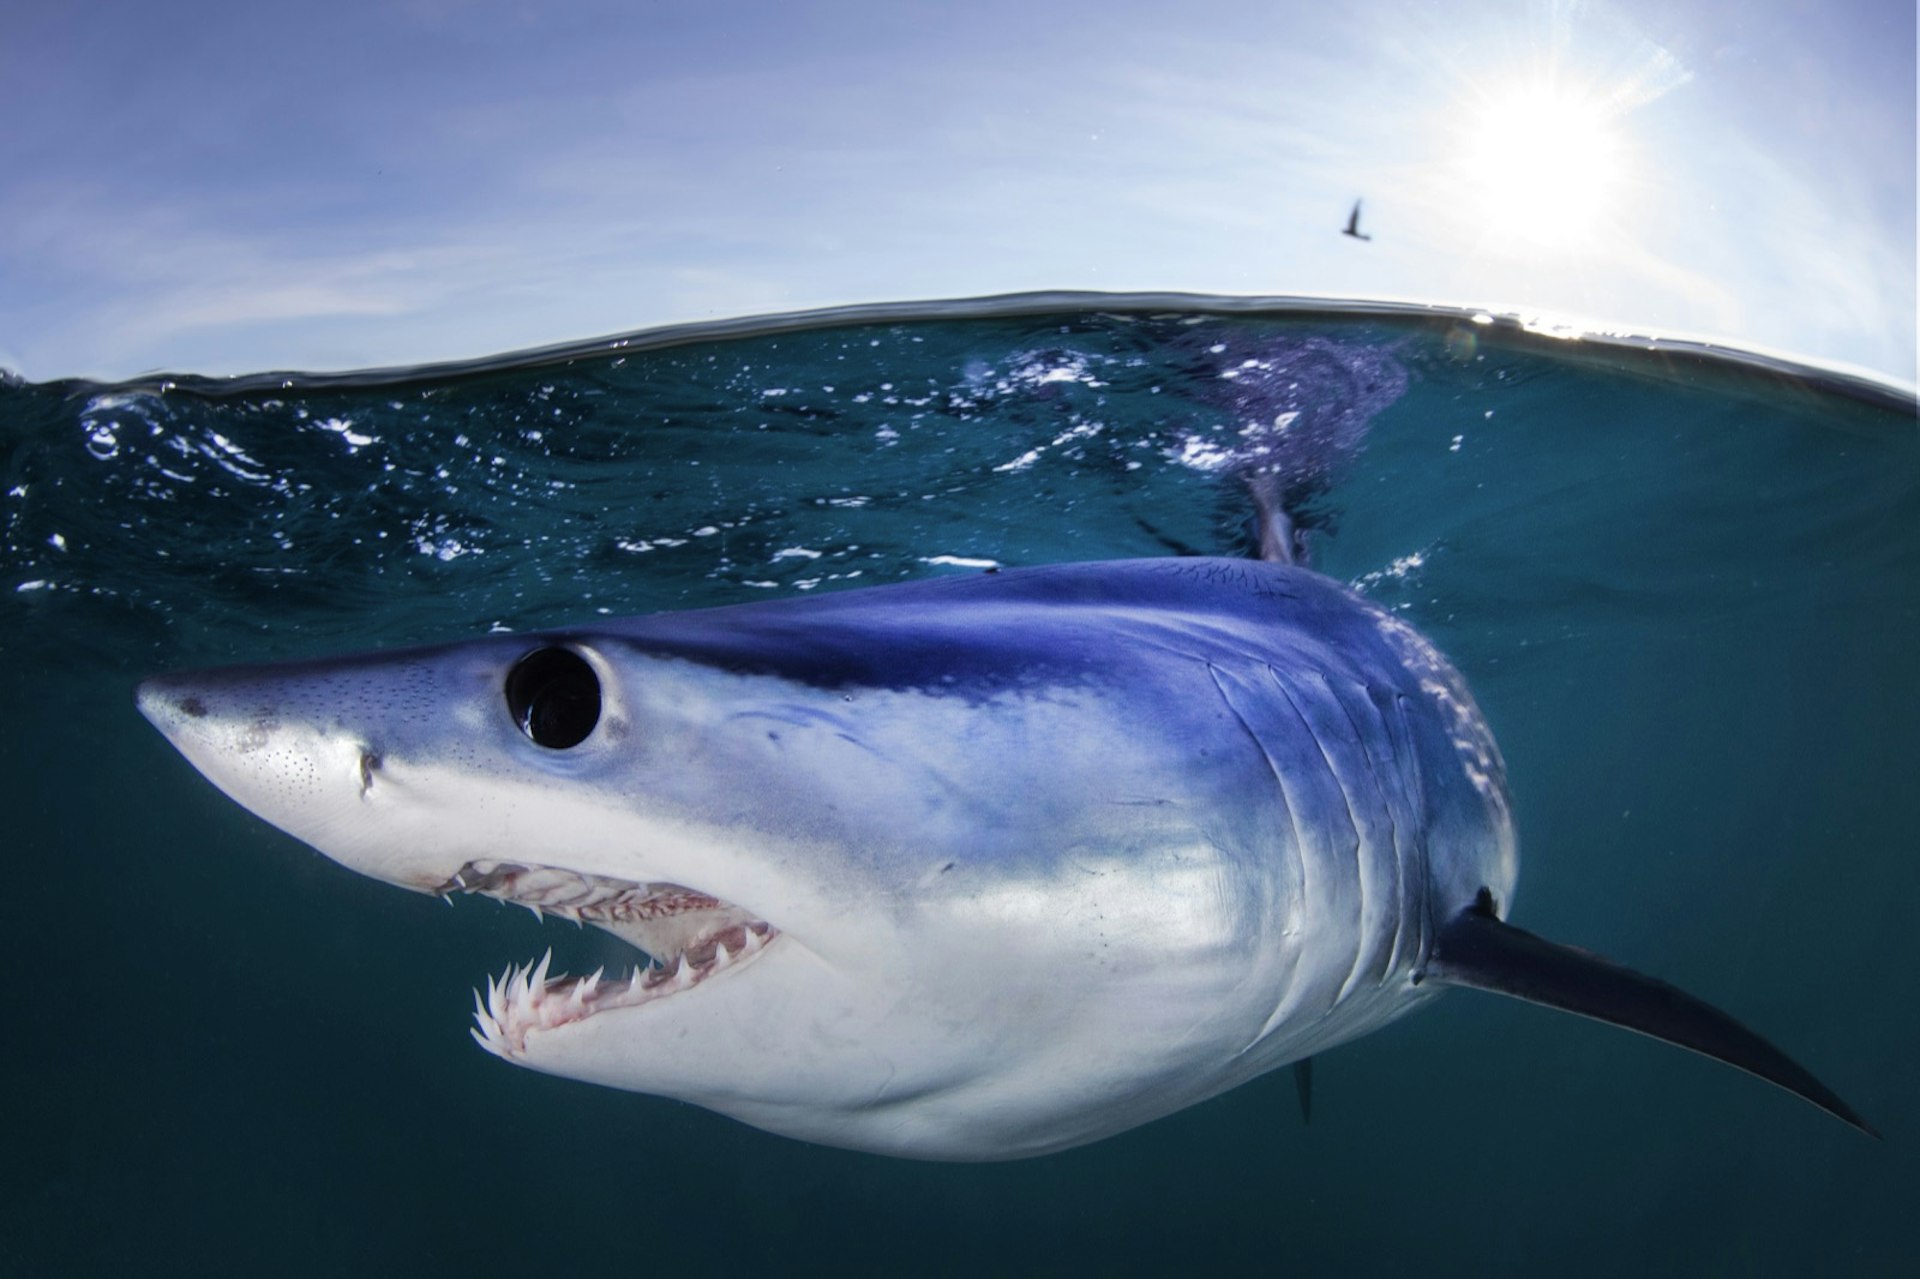 A shark with a wide black eye and rows of sharp teeth swims under the water